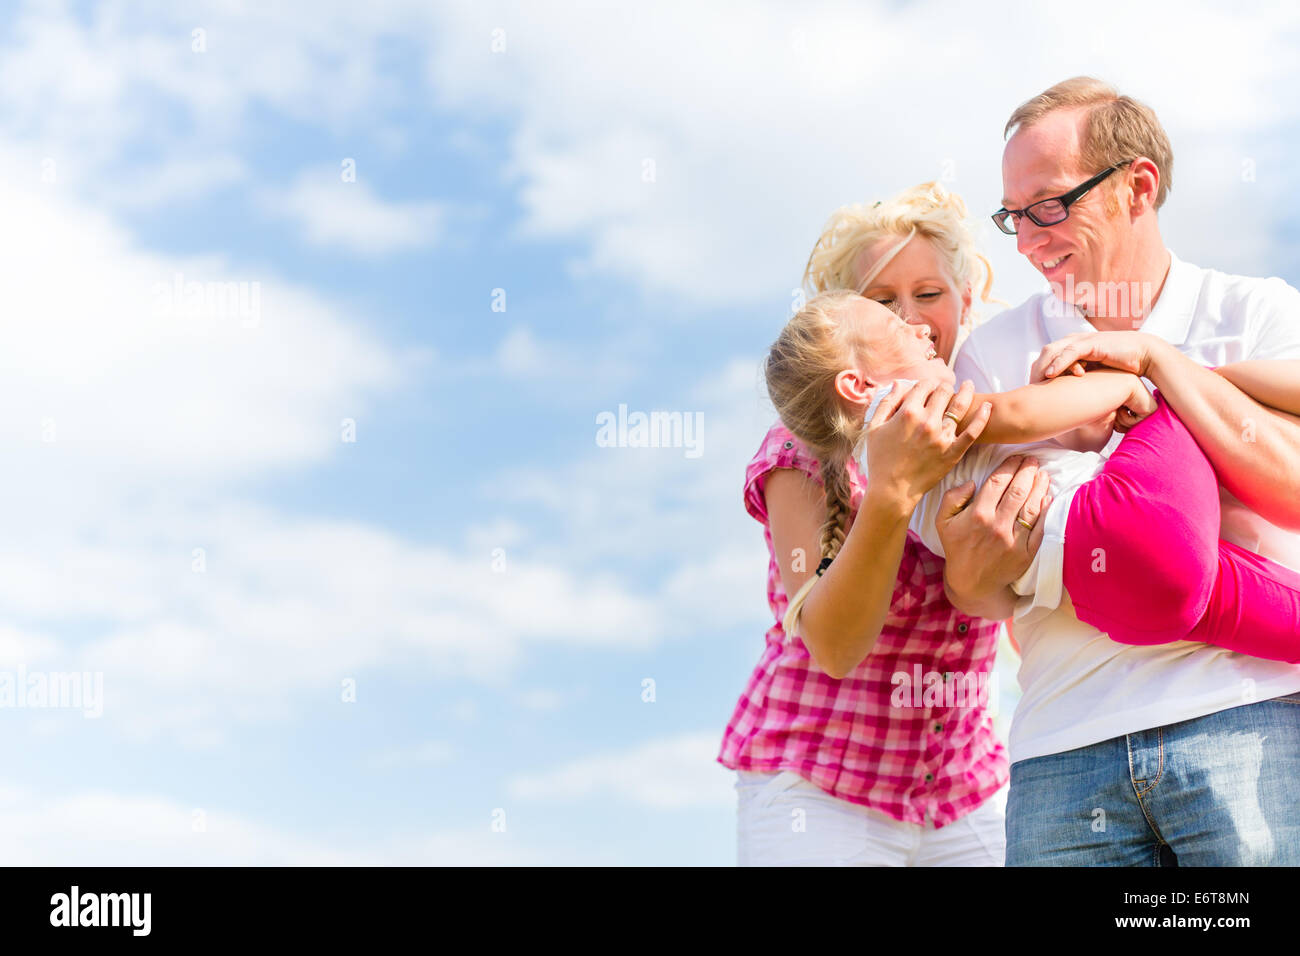 Family romping on field with parents carrying child Stock Photo